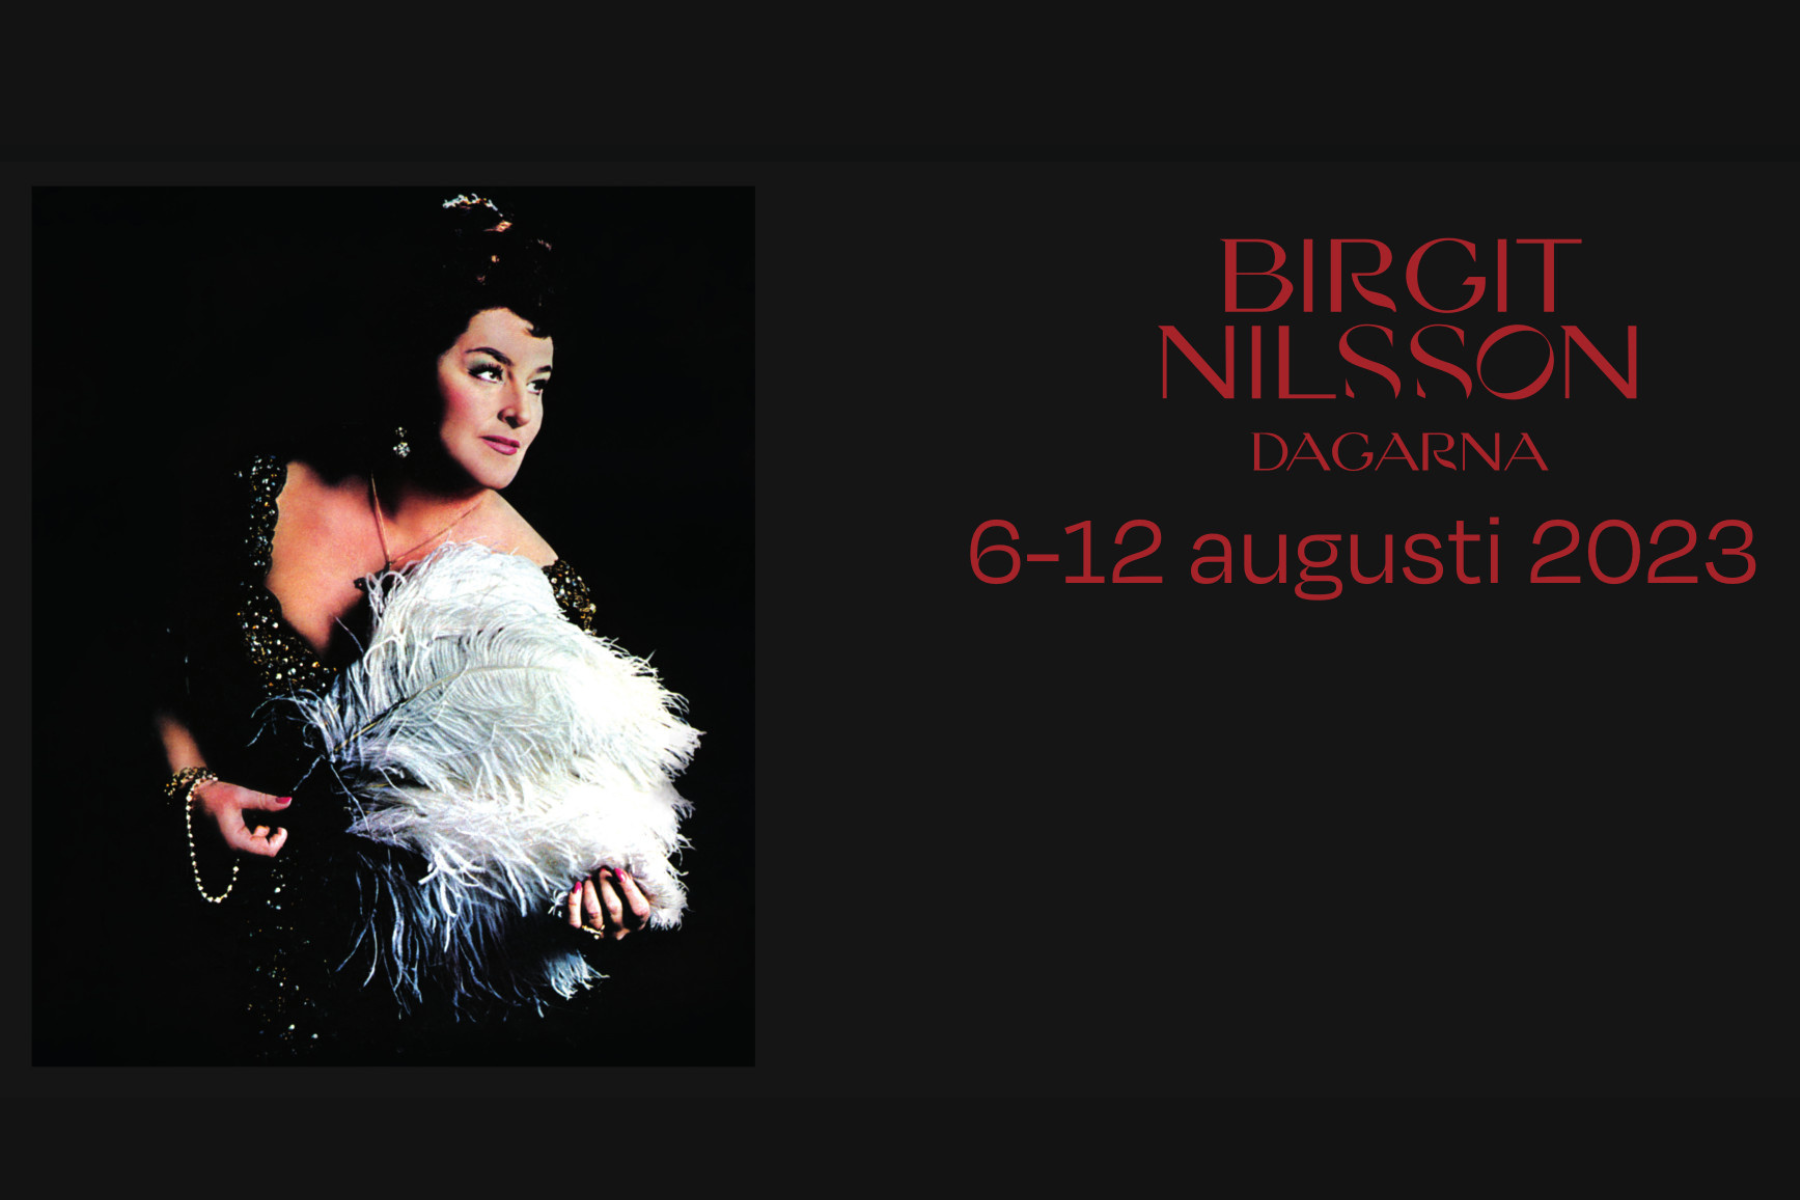 You are currently viewing Birgit Nilsson days with Opera, Concerts and Master Class